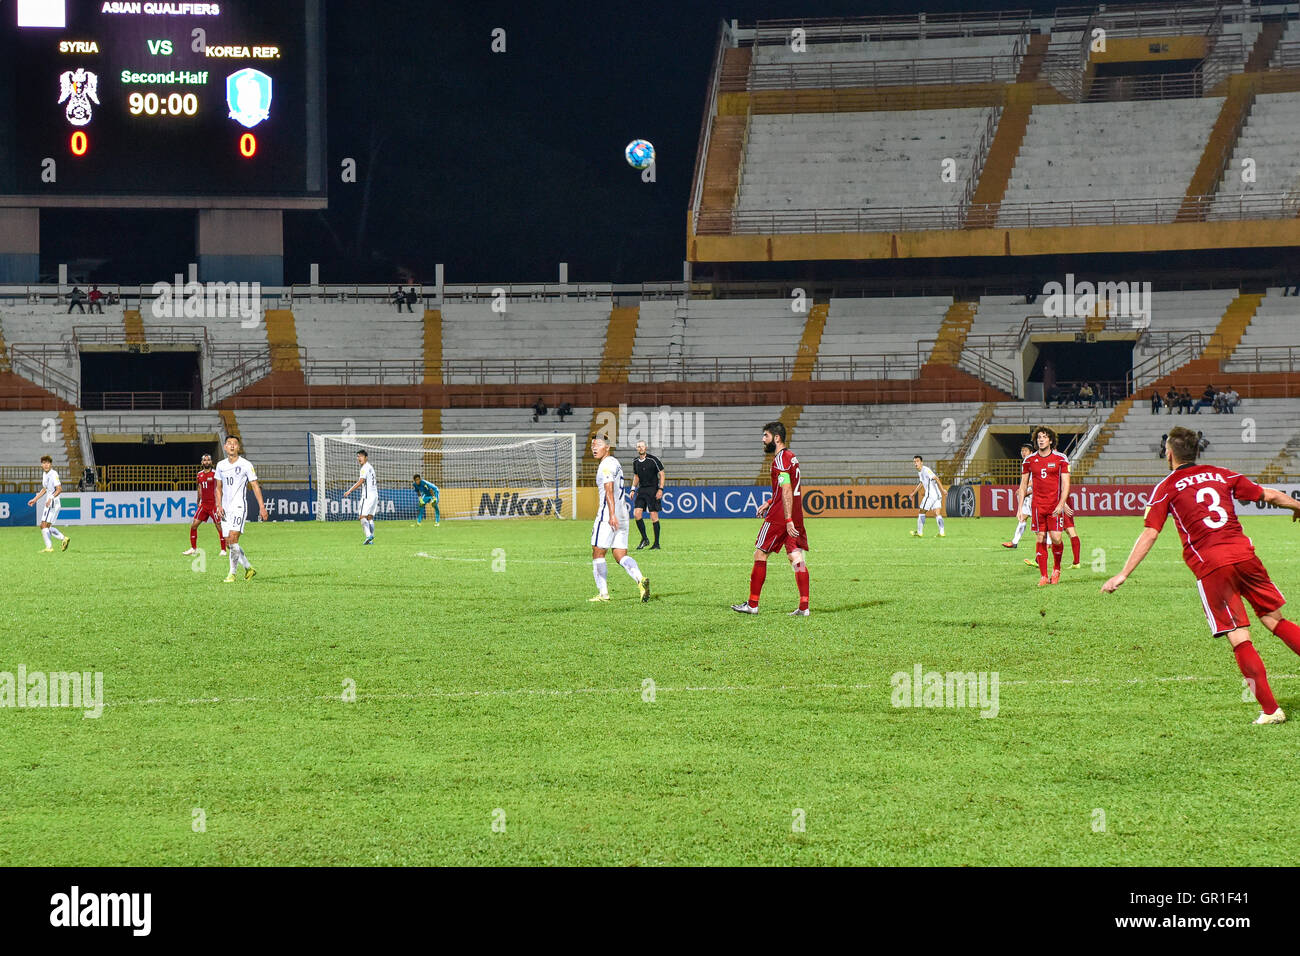 Seremban, Malaysia. 6th September, 2016. The 2018 FIFA World Cup qualifiers football match between South Korea and Syria was a draw match. The Final score is 0:0 at Tuanku Abdul Rahman Stadium in Seremban on September 6, 2016. Credit:  Chris JUNG/Alamy Live News Stock Photo